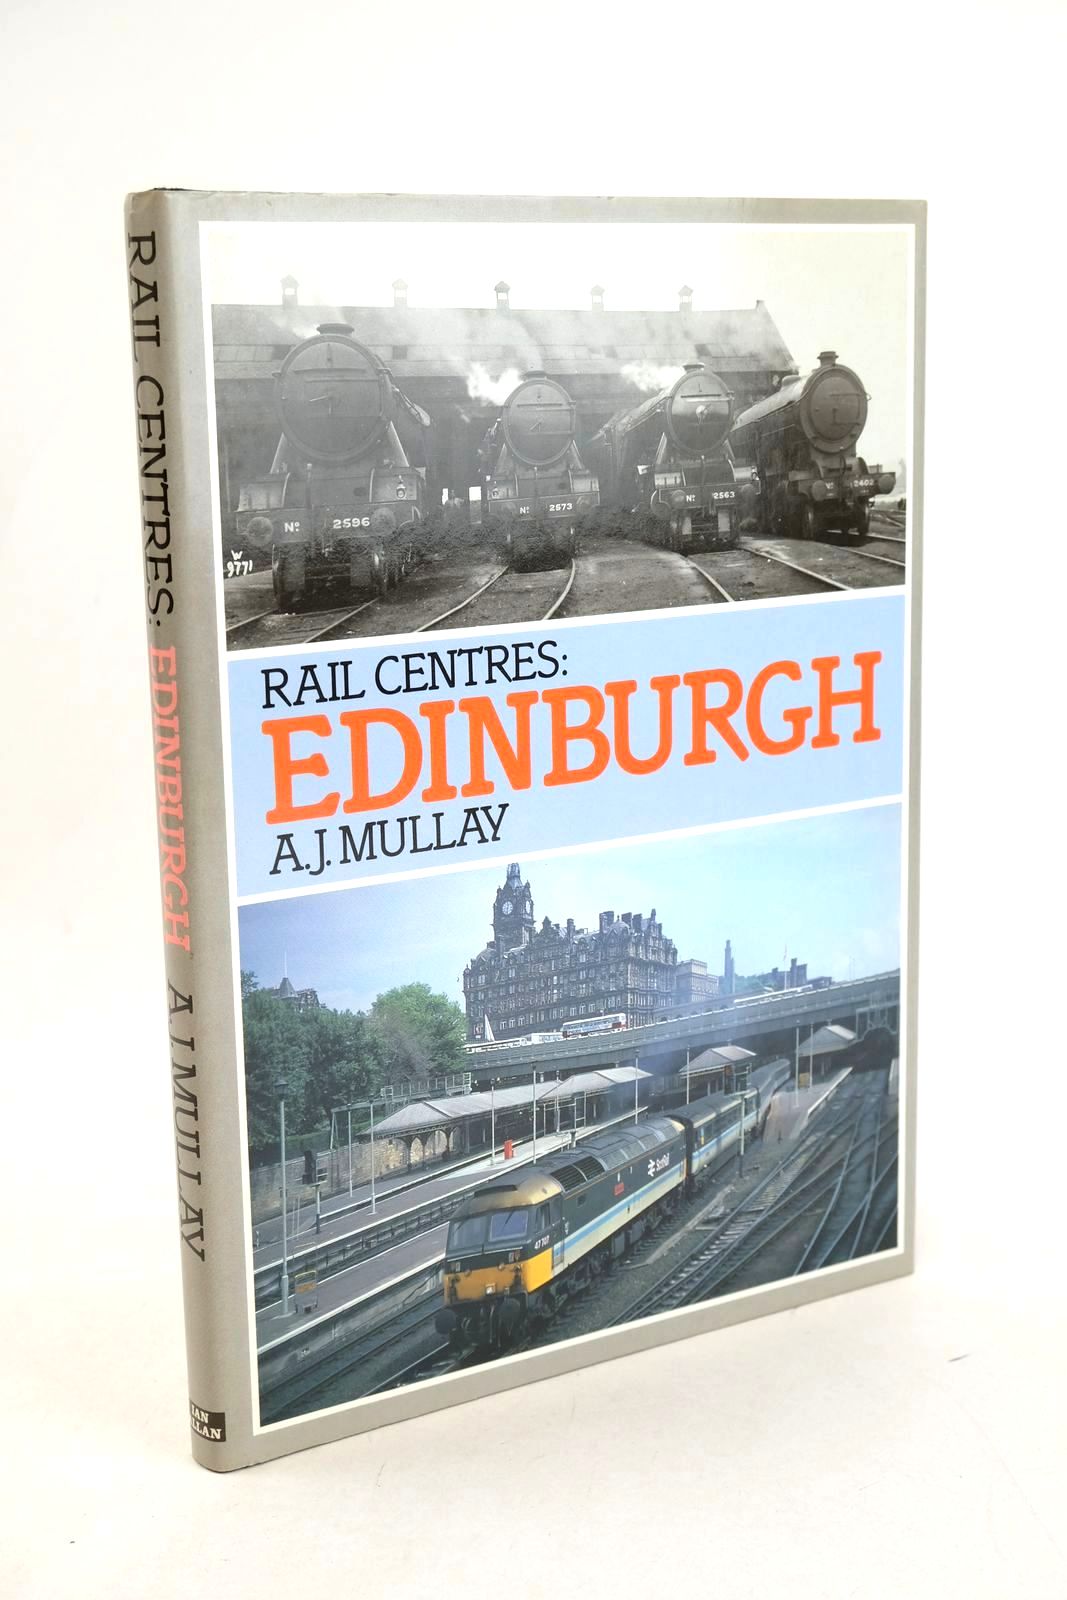 Photo of RAIL CENTRES: EDINBURGH written by Mullay, A.J. published by Ian Allan Ltd. (STOCK CODE: 1327442)  for sale by Stella & Rose's Books